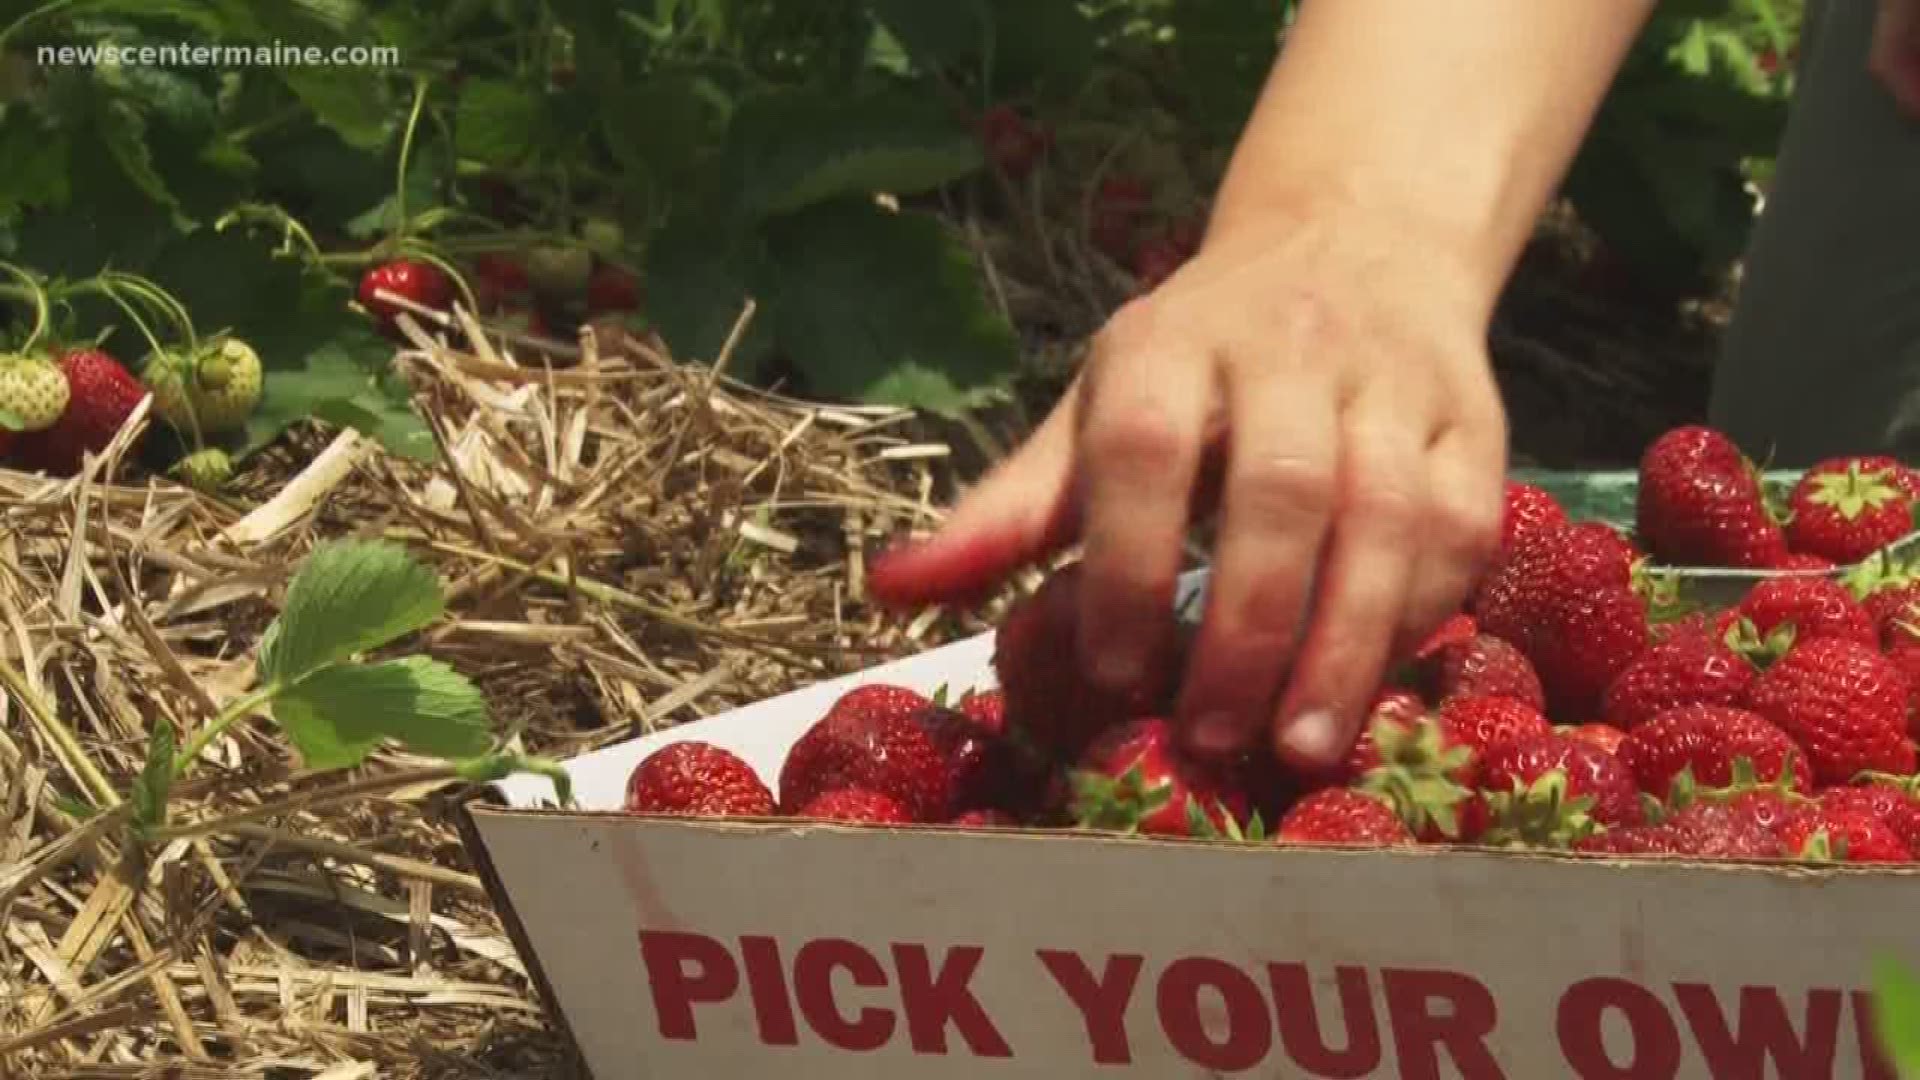 Due to the cold spring, strawberries were two to three week later than normal. Now with warmer temperatures and sunshine, it's looking like a bumper crop has arrived.